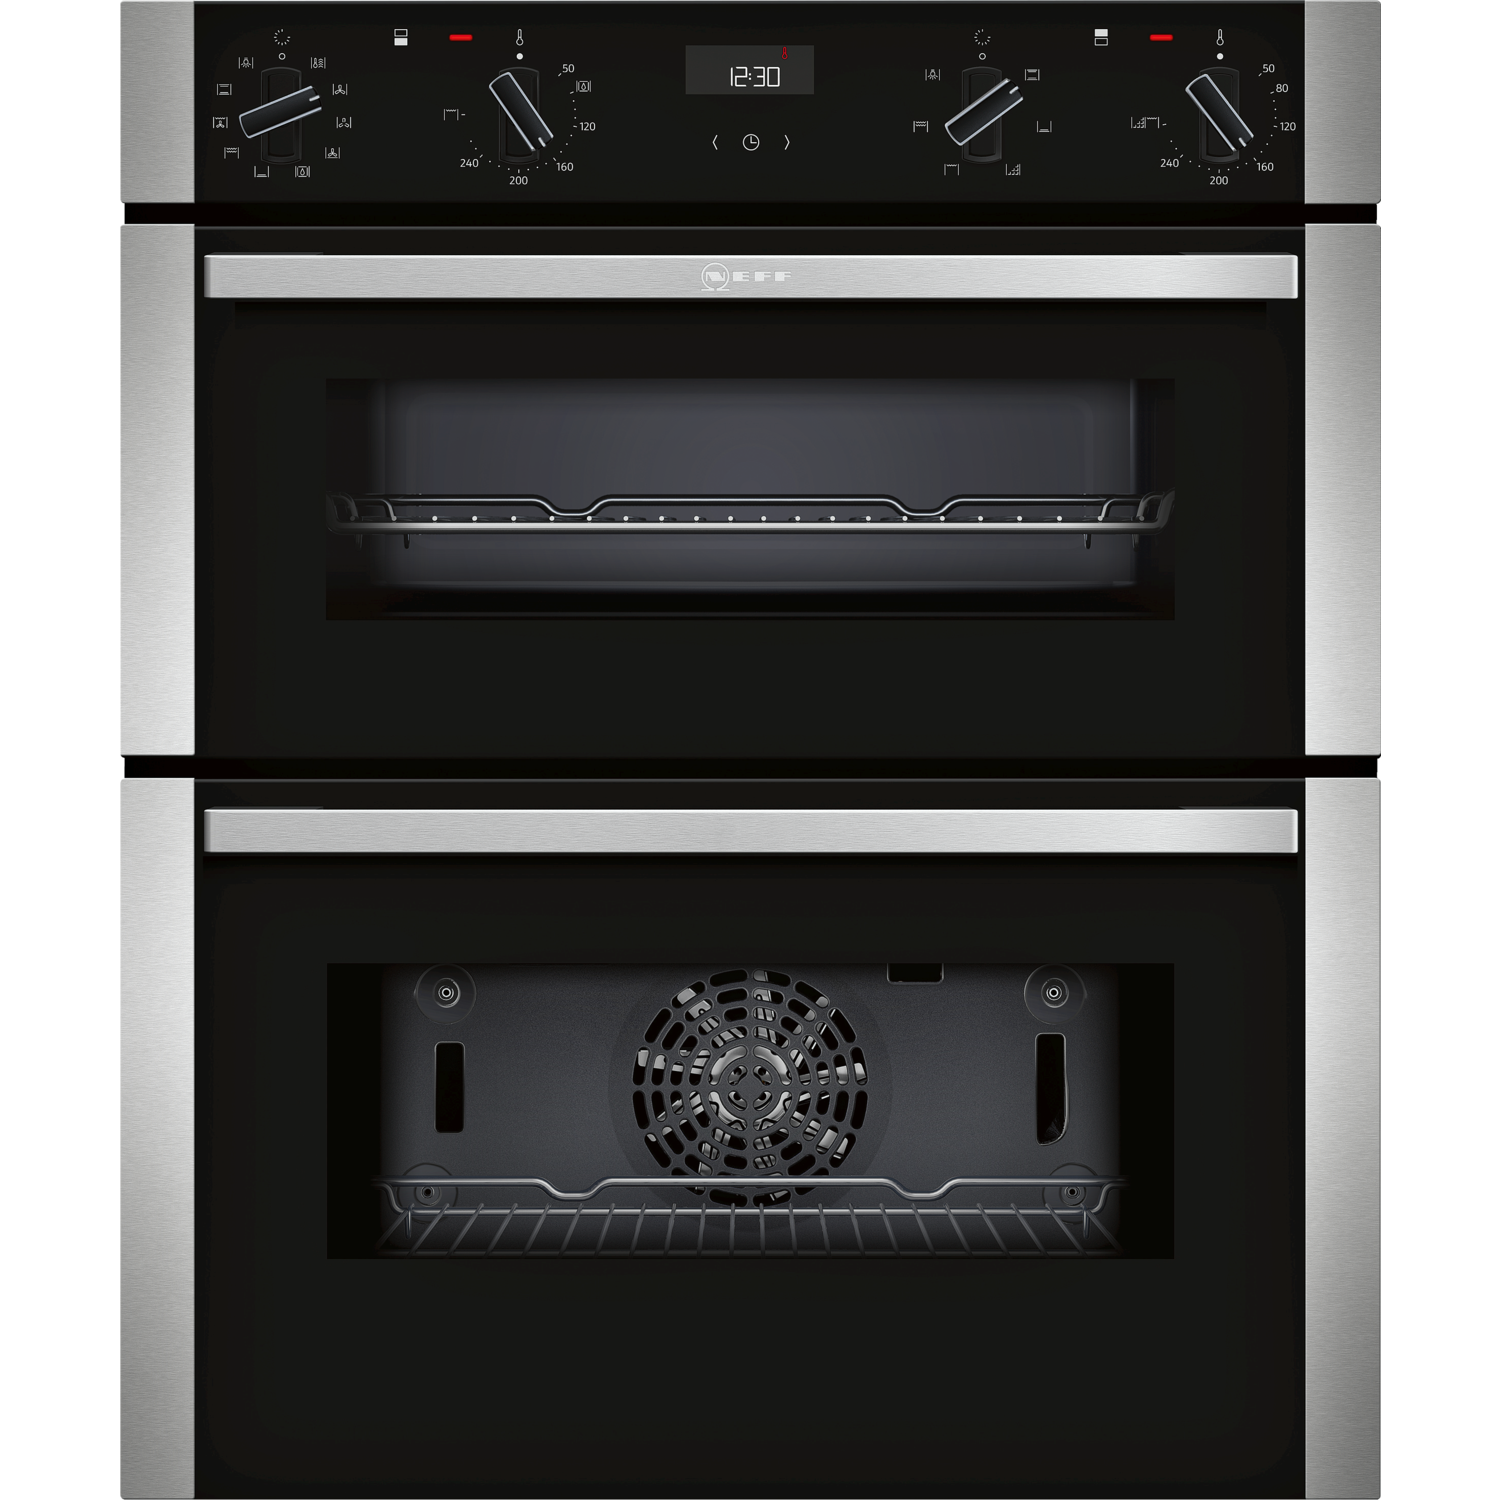 Neff N50 Electric Built Under Double Oven with Catalytic Cleaning - Stainless Steel